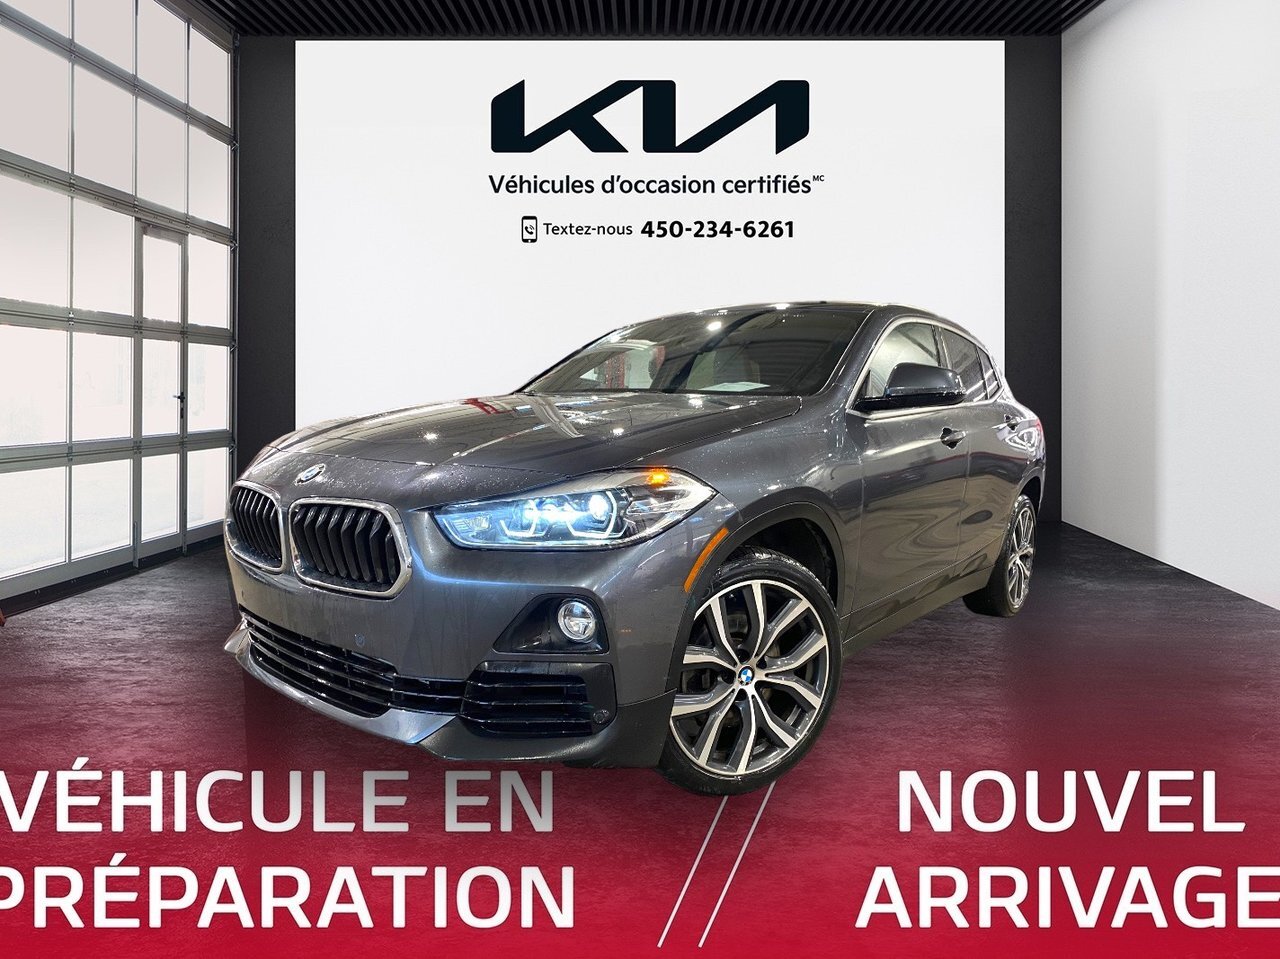 2019 BMW X2 XDrive28i, AUCUN ACCIDENT, CUIR, TOIT, GPS, MAGS I